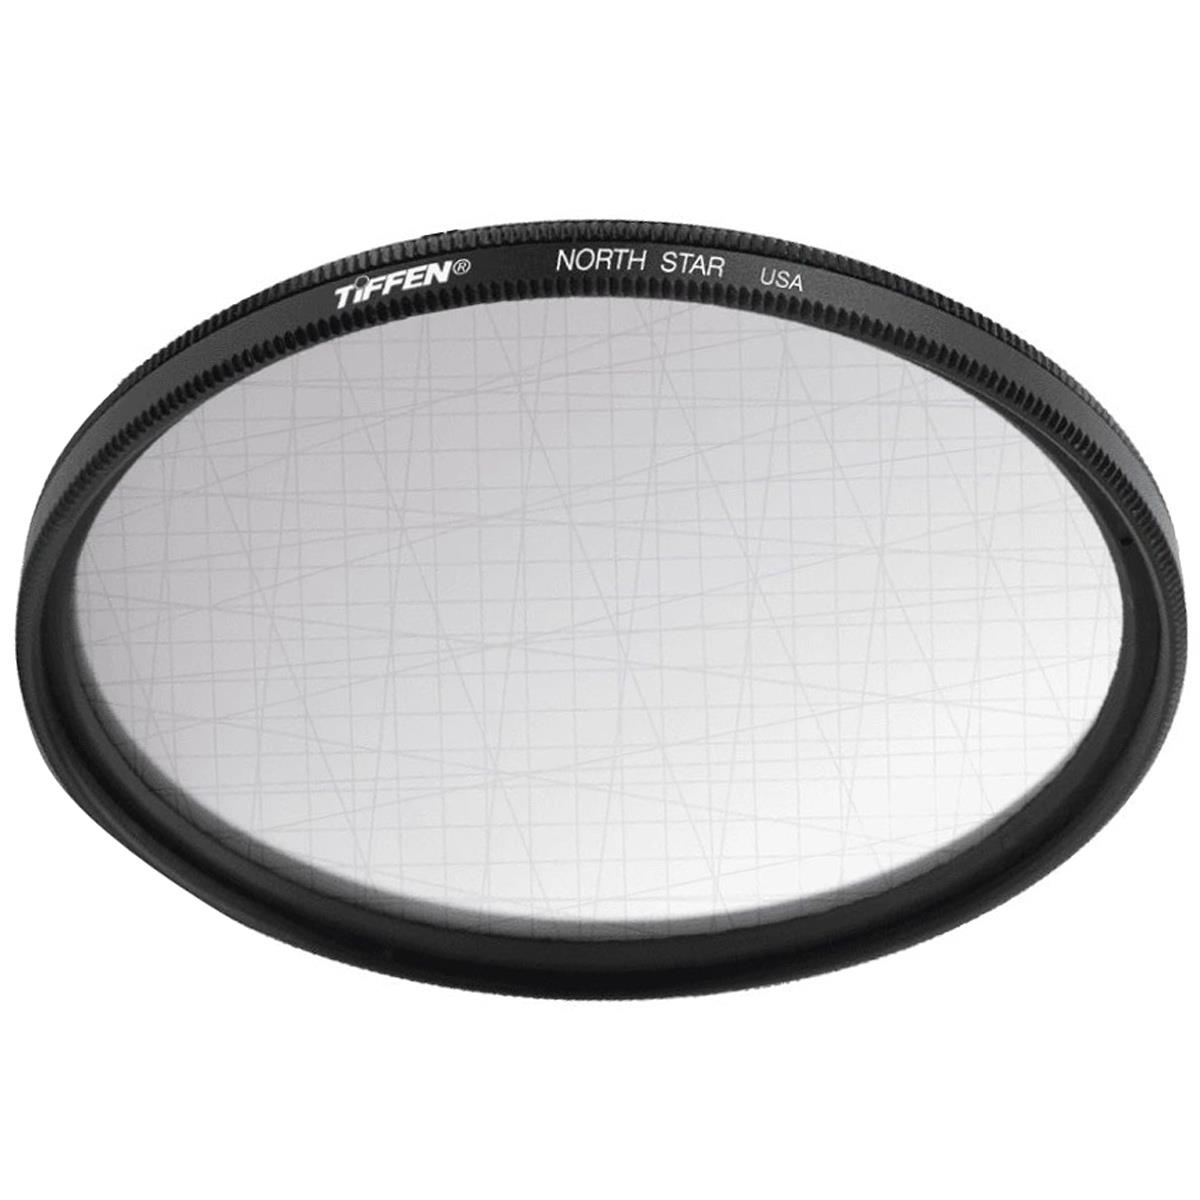 Image of Tiffen 72mm North Star/FX Special Star Effect Filter